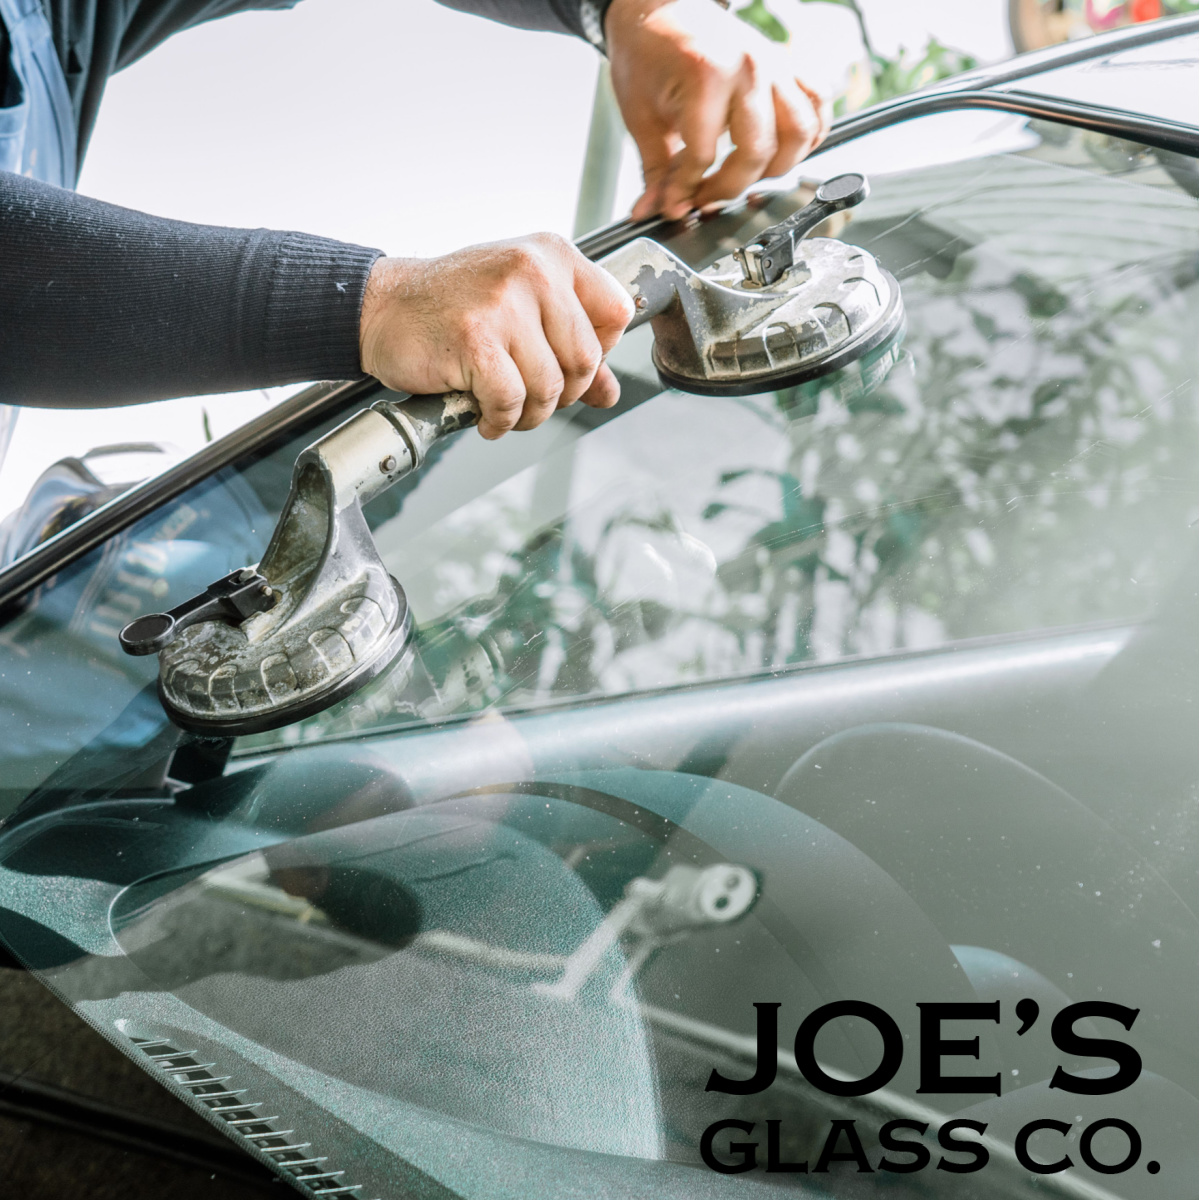 Are You Looking For Top Notch Auto Glass Service, Repair or Replacement? Call Joe's Glass Co.!